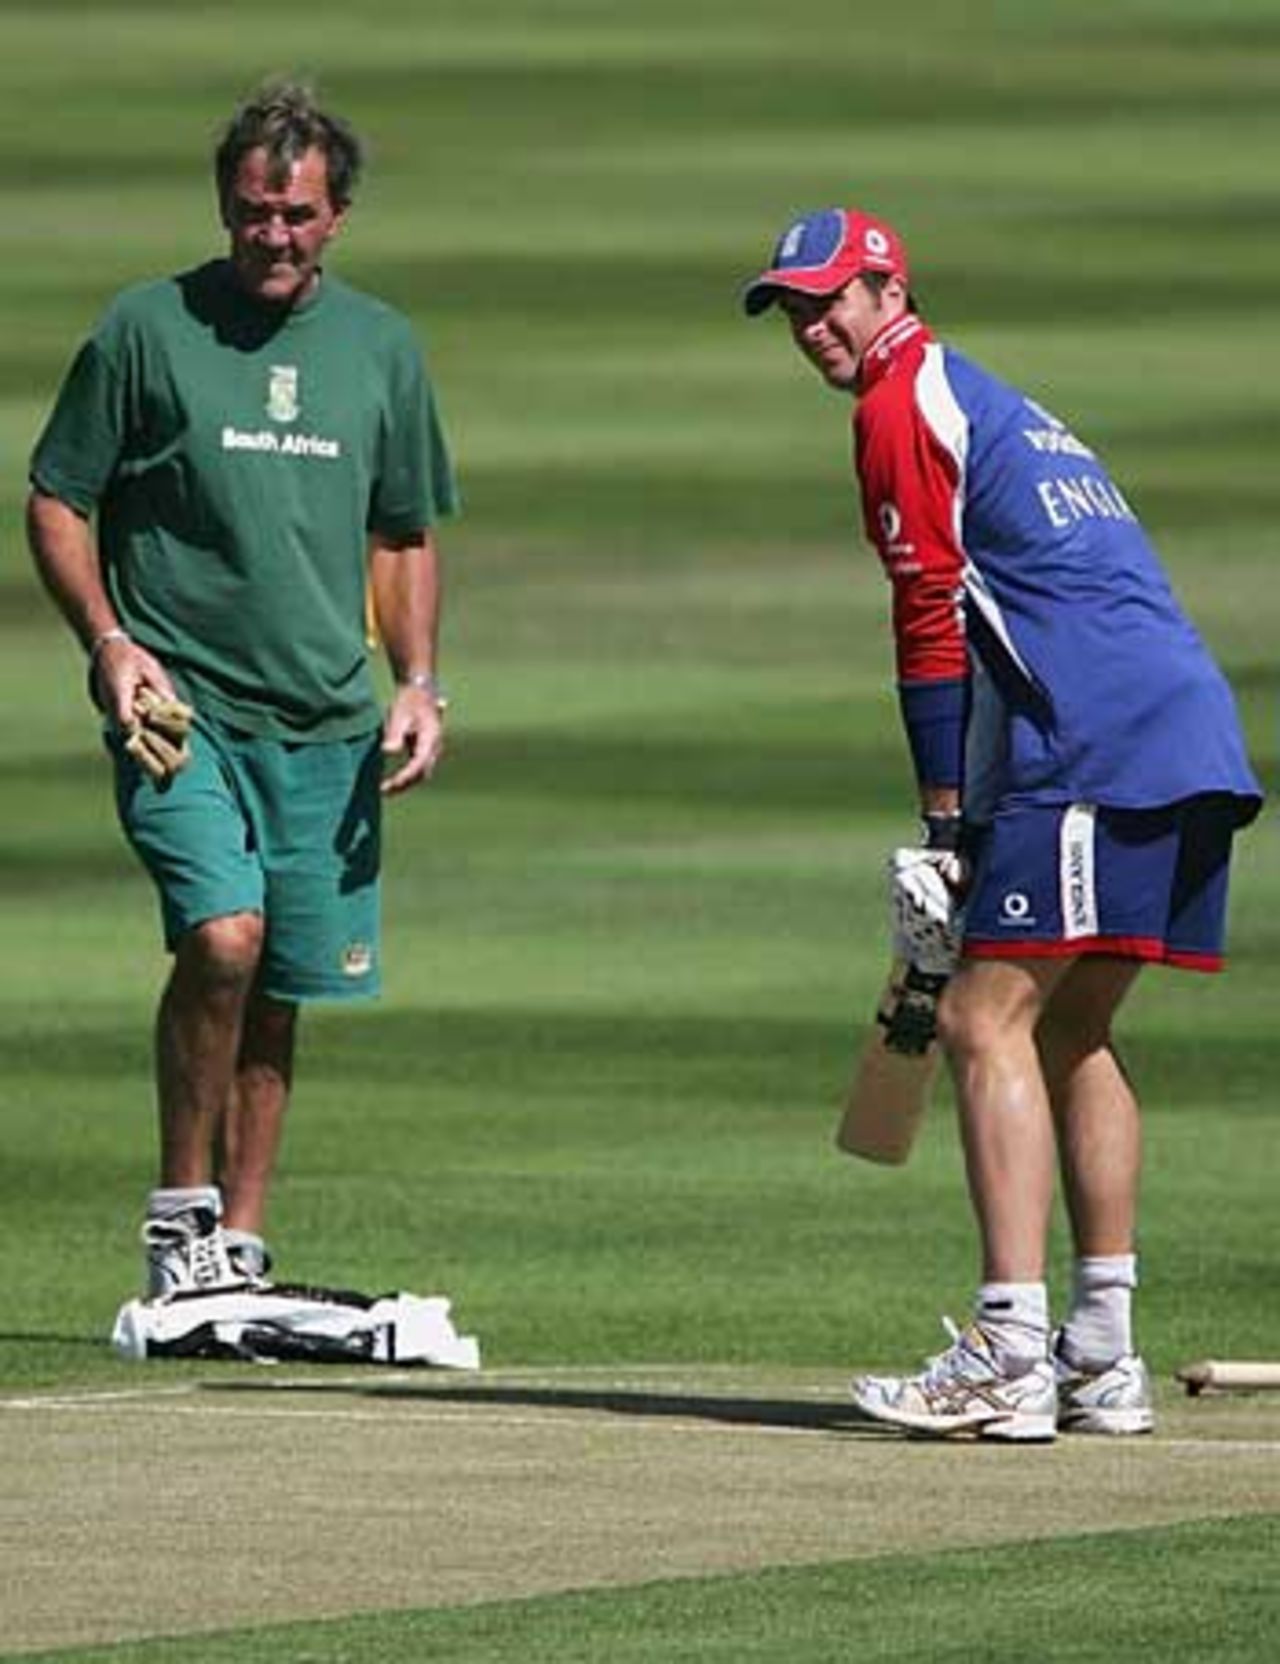 Michael Vaughan and Steve Rouse inspect the Edgbaston pitch ahead of the second Test, Edgbaston, August 3